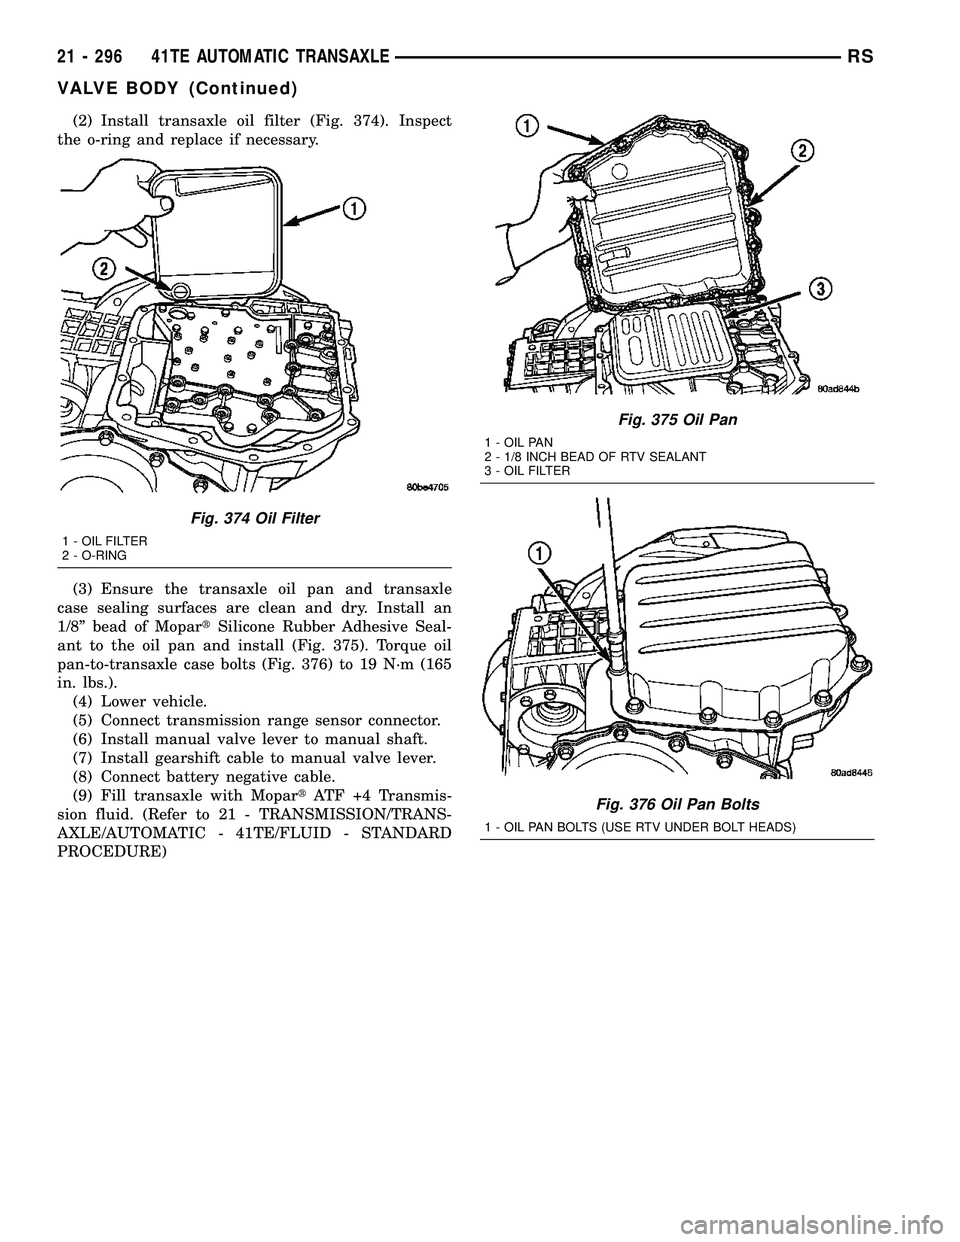 CHRYSLER VOYAGER 2005  Service Manual (2) Install transaxle oil filter (Fig. 374). Inspect
the o-ring and replace if necessary.
(3) Ensure the transaxle oil pan and transaxle
case sealing surfaces are clean and dry. Install an
1/8º bead 